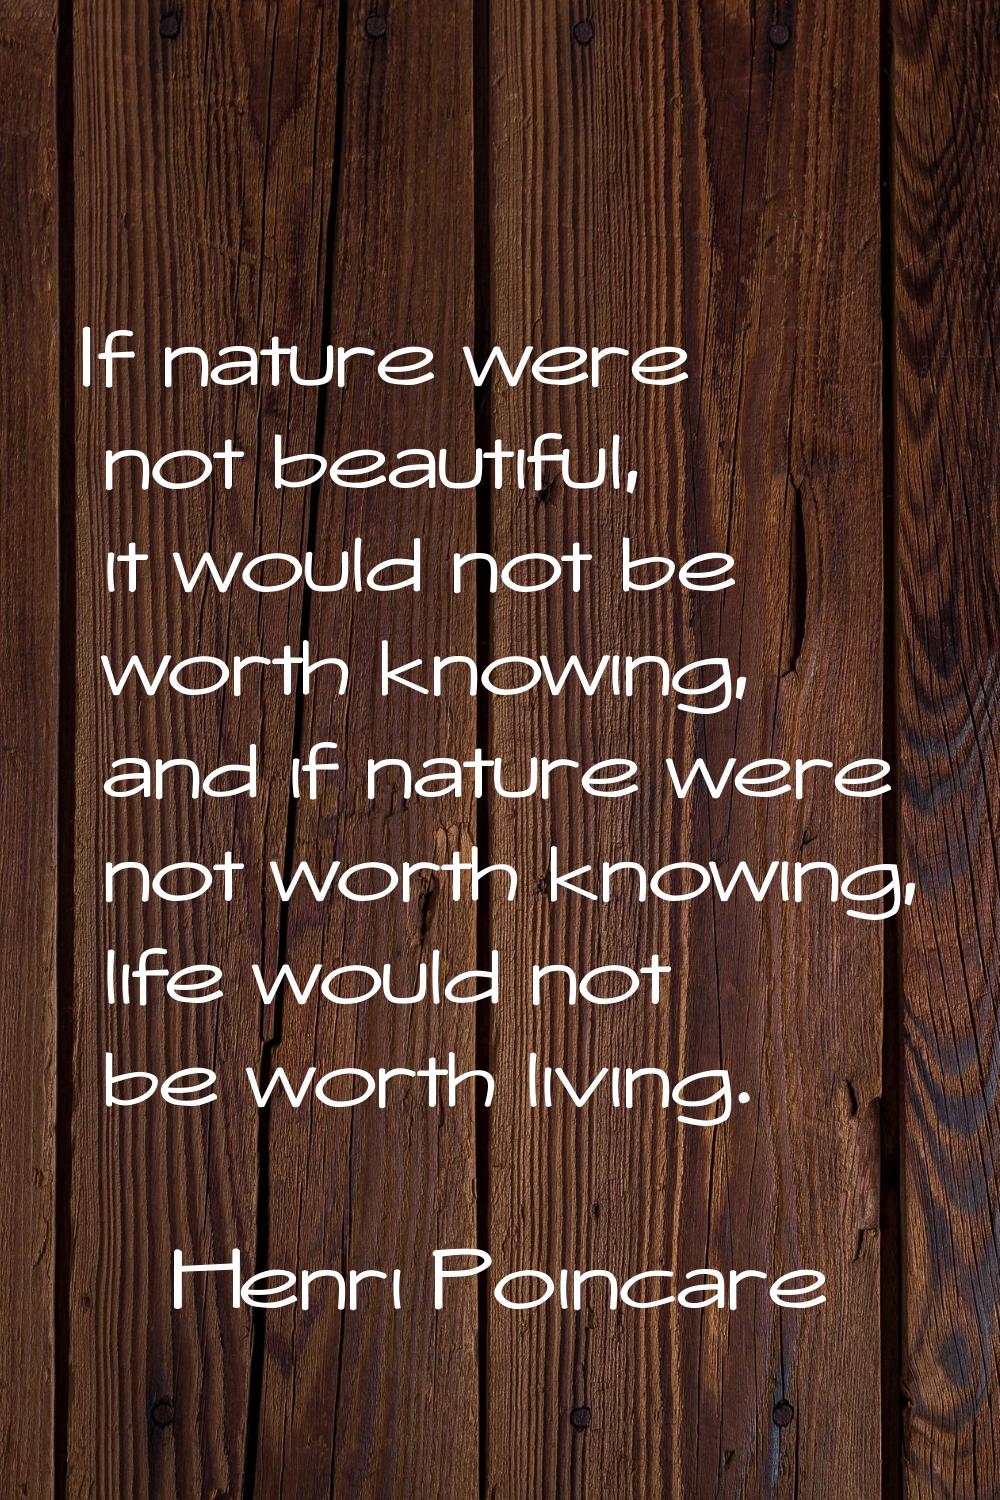 If nature were not beautiful, it would not be worth knowing, and if nature were not worth knowing, 